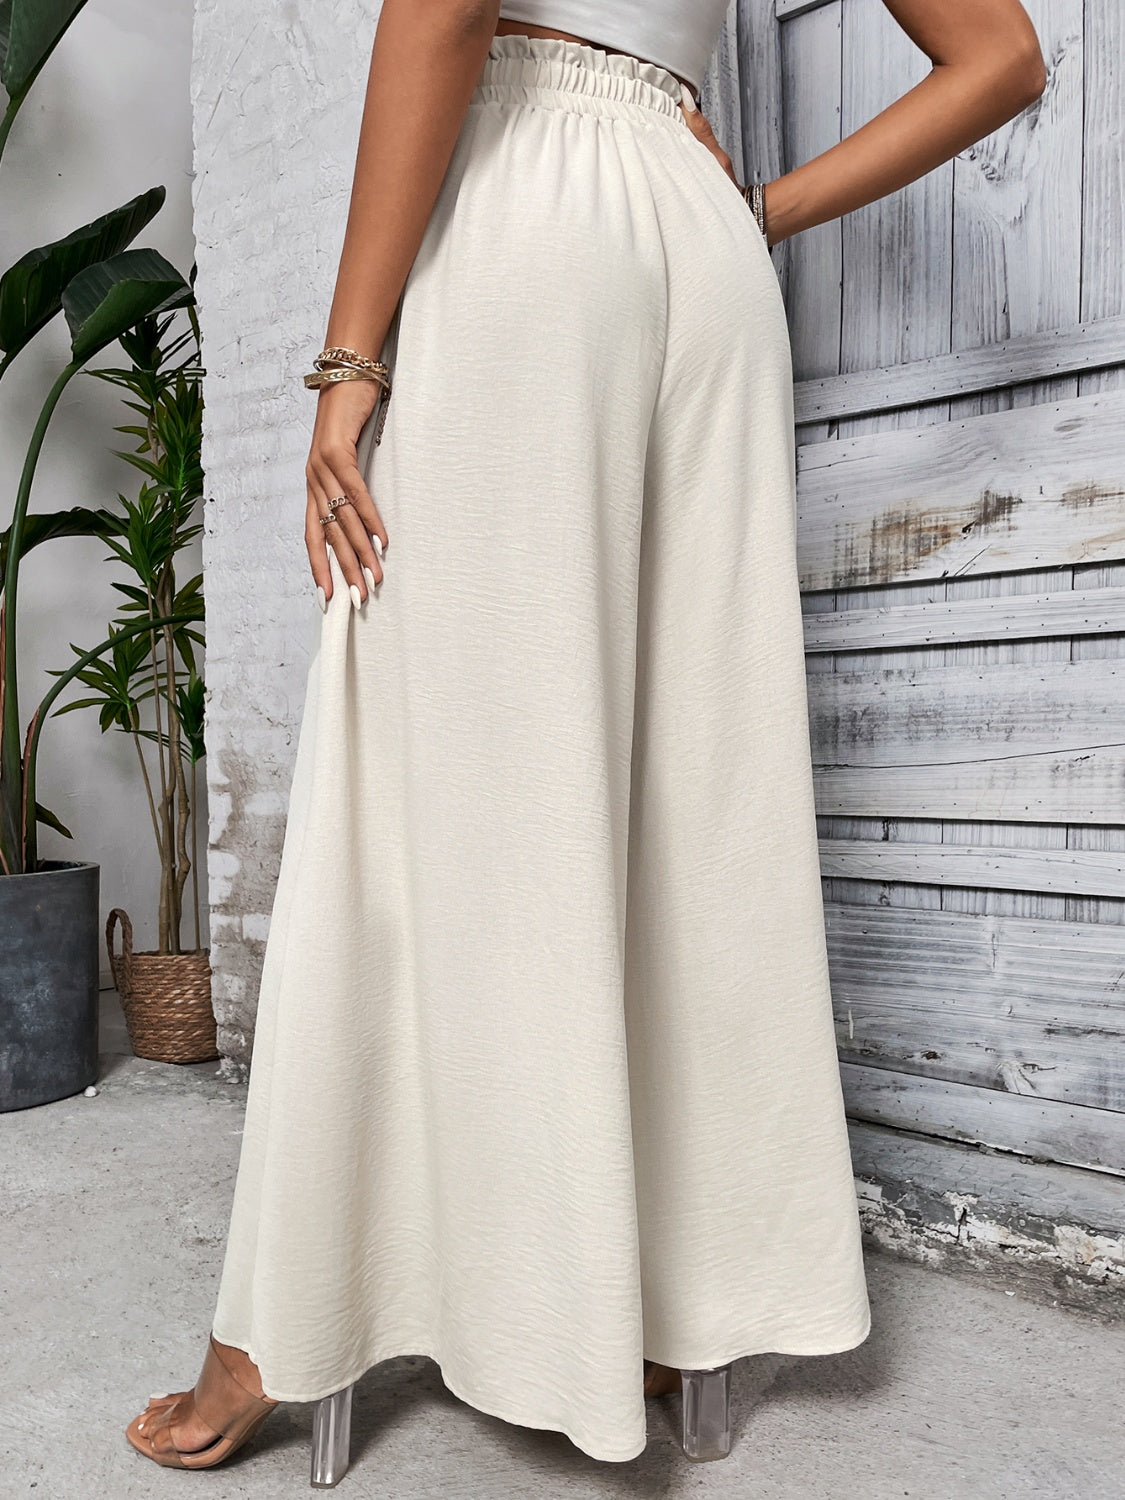 Whoopsie Daisy-Tied High Waist Wide Leg Pants-Whoopsie Daisy